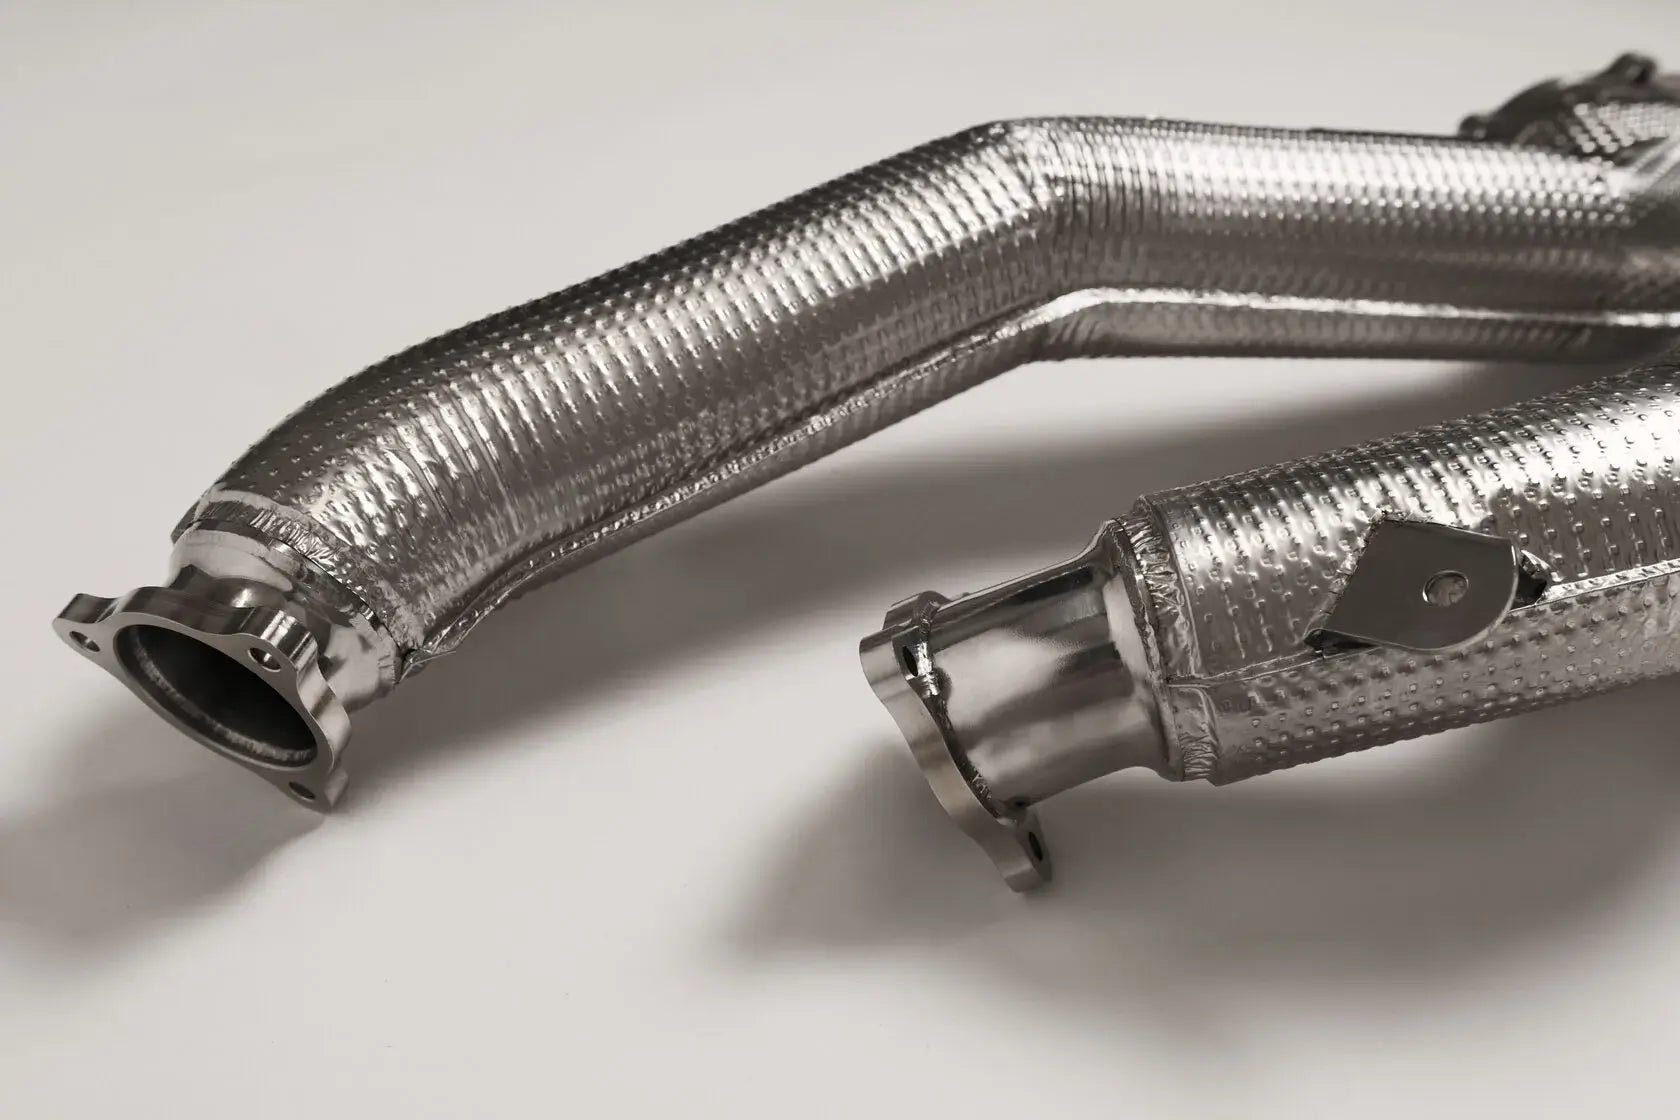 DEIKIN 10-AUDI.RS6.C7-DP Downpipe for AUDI RS6 (C7) without HeatShield Photo-3 